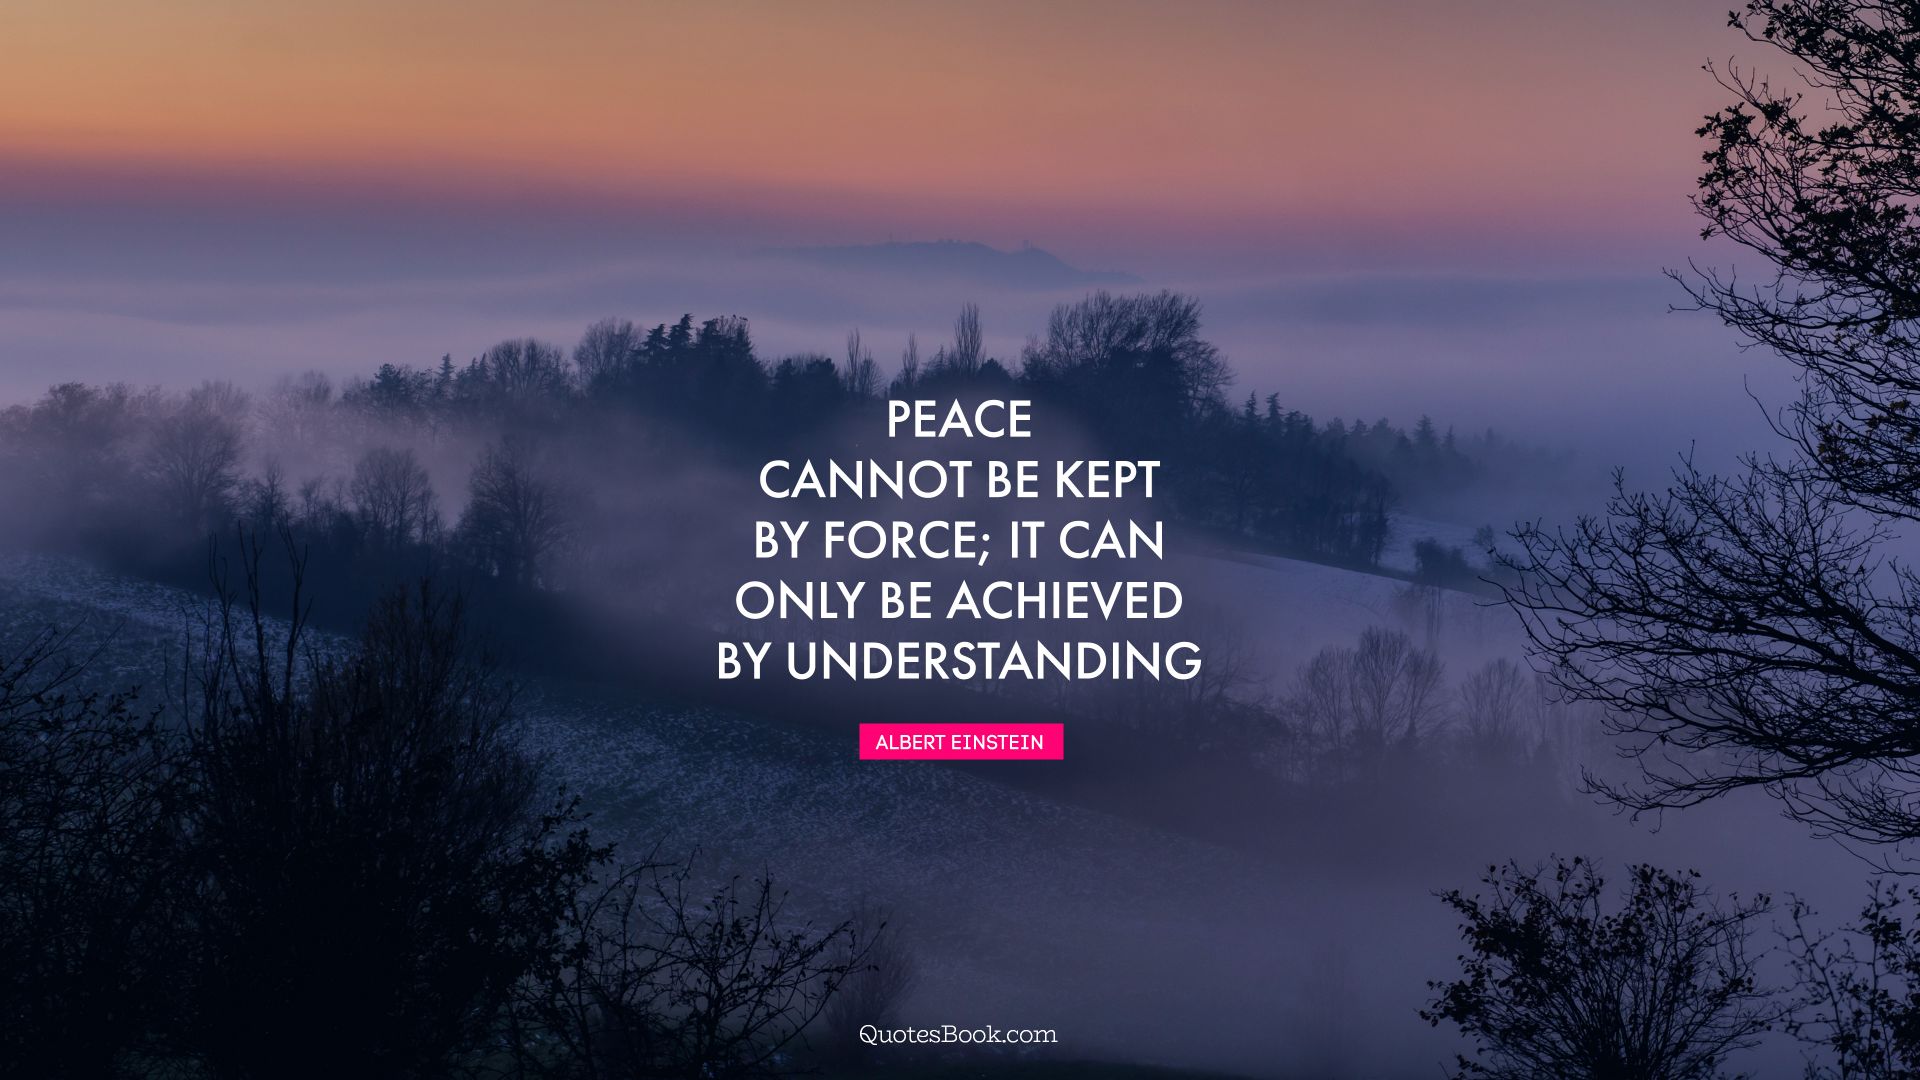 Peace cannot be kept by force; it can only be achieved by understanding. - Quote by Albert Einstein